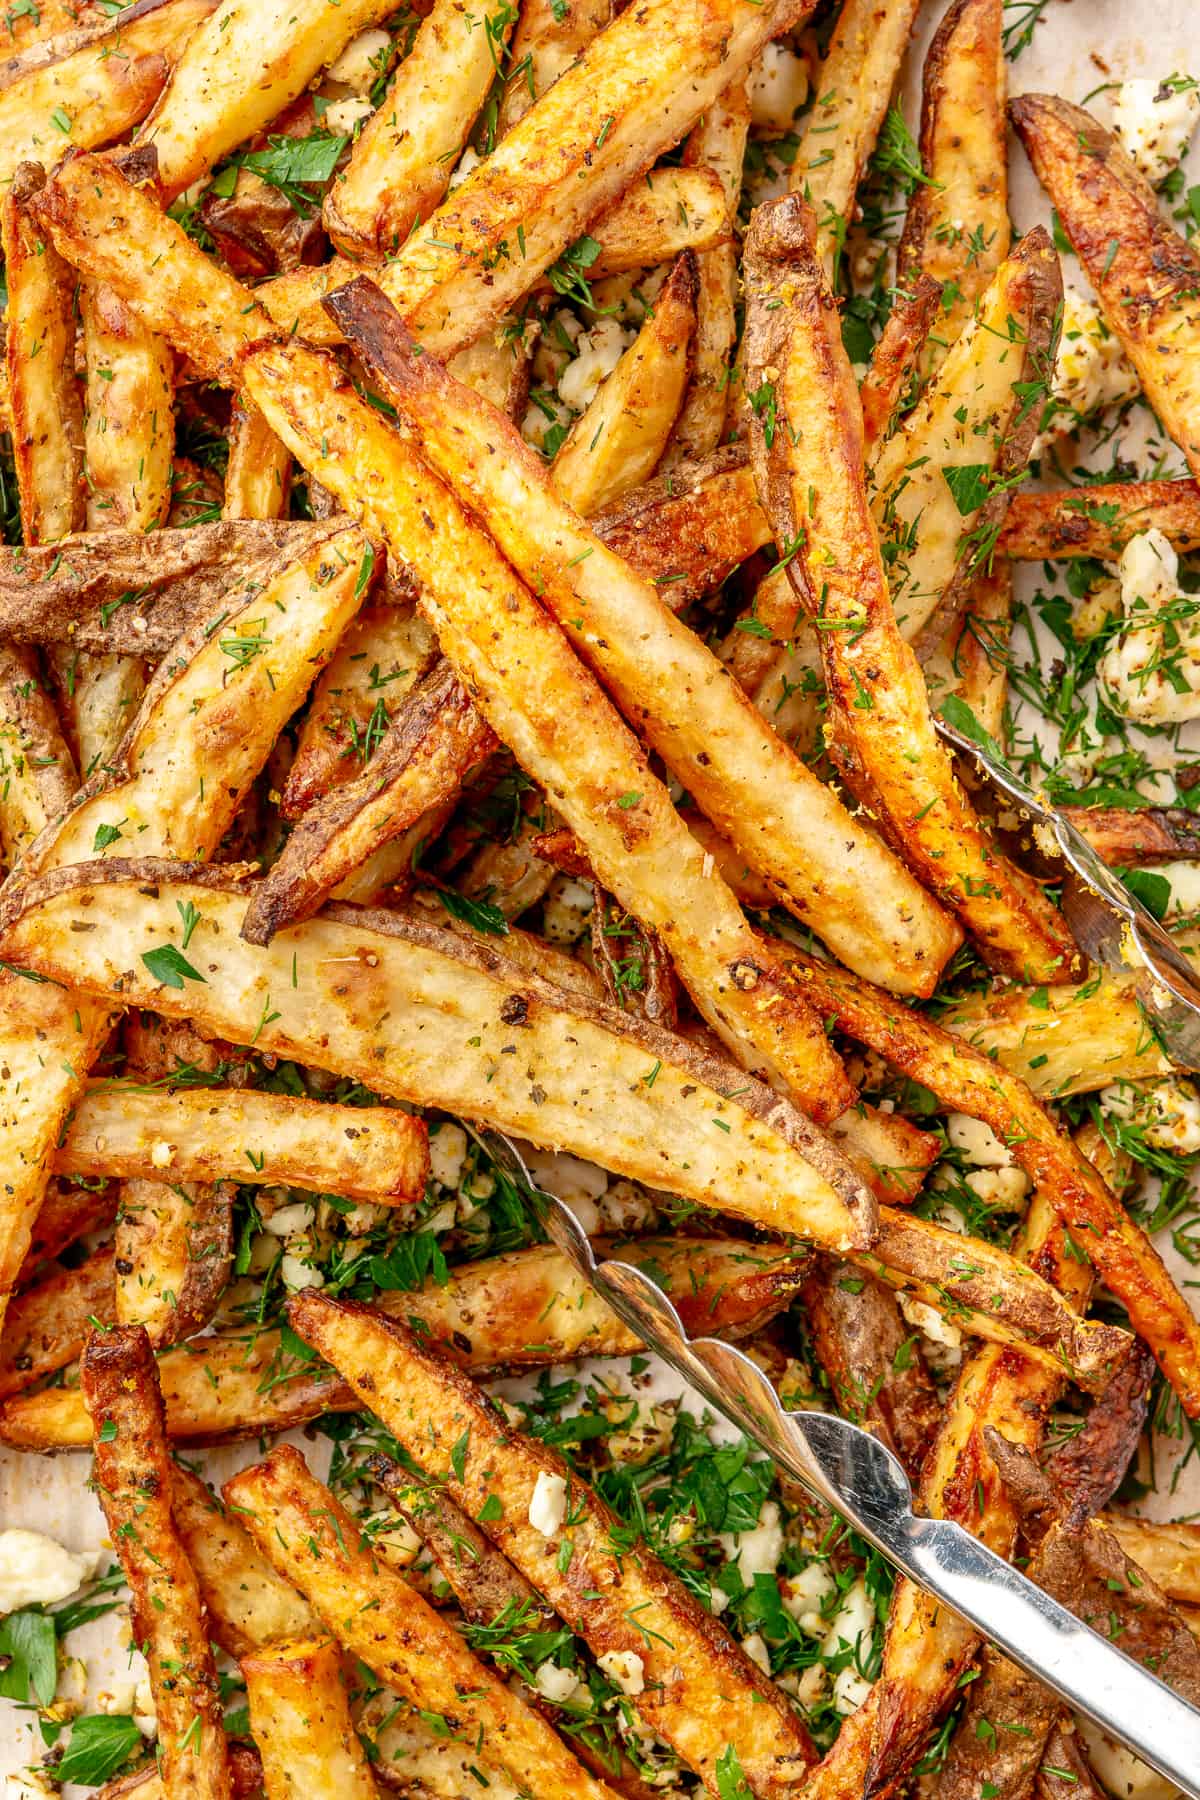 Close up of fries on sheet pan with garlic and herbs.